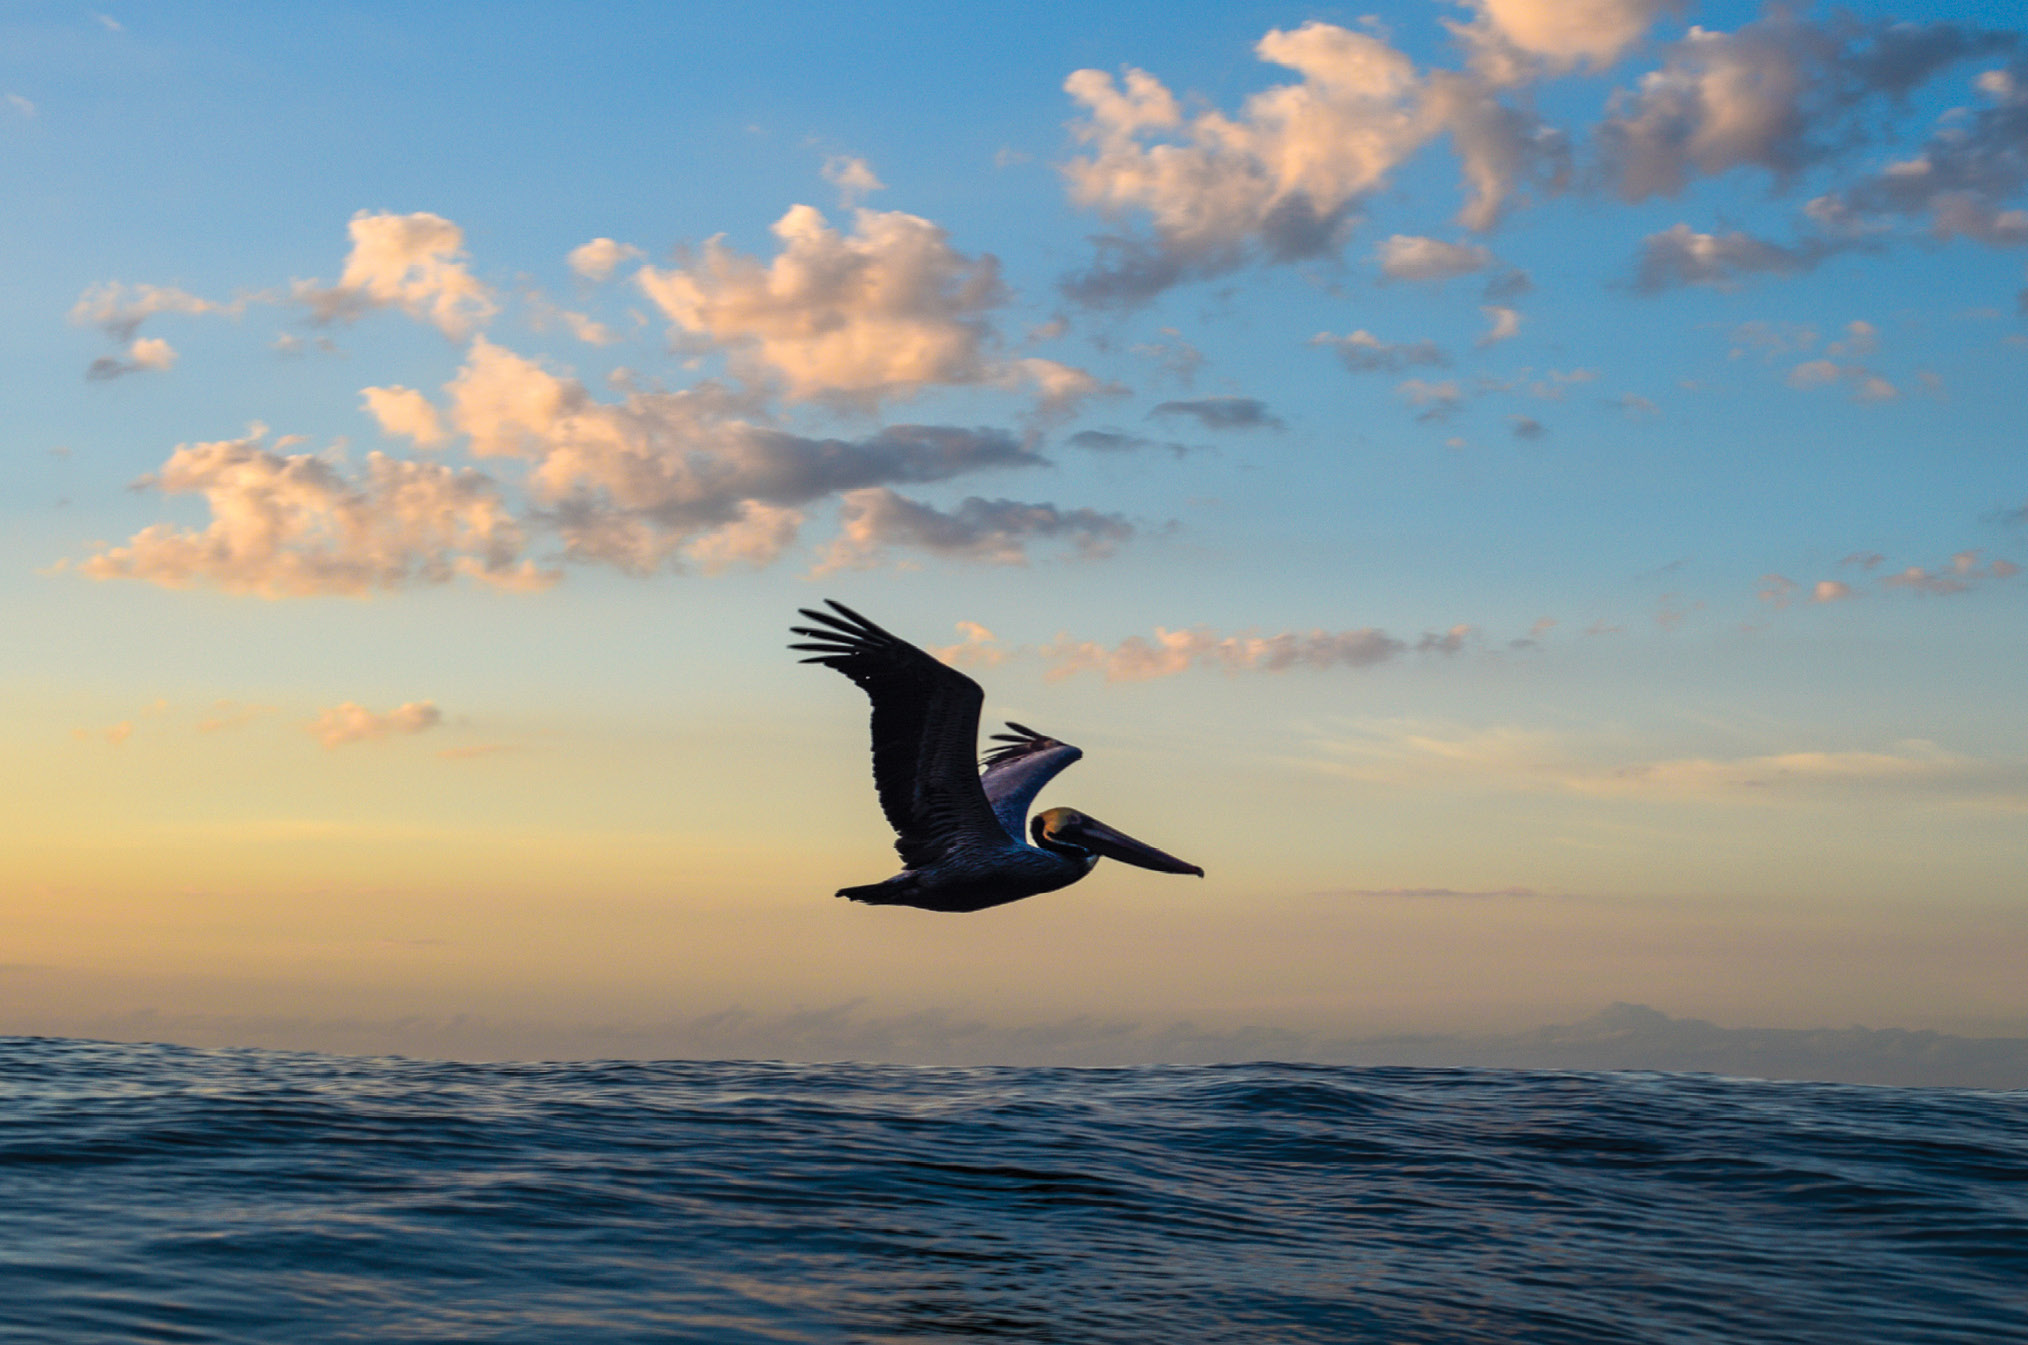 A pelican scans the waves during an April sunrise